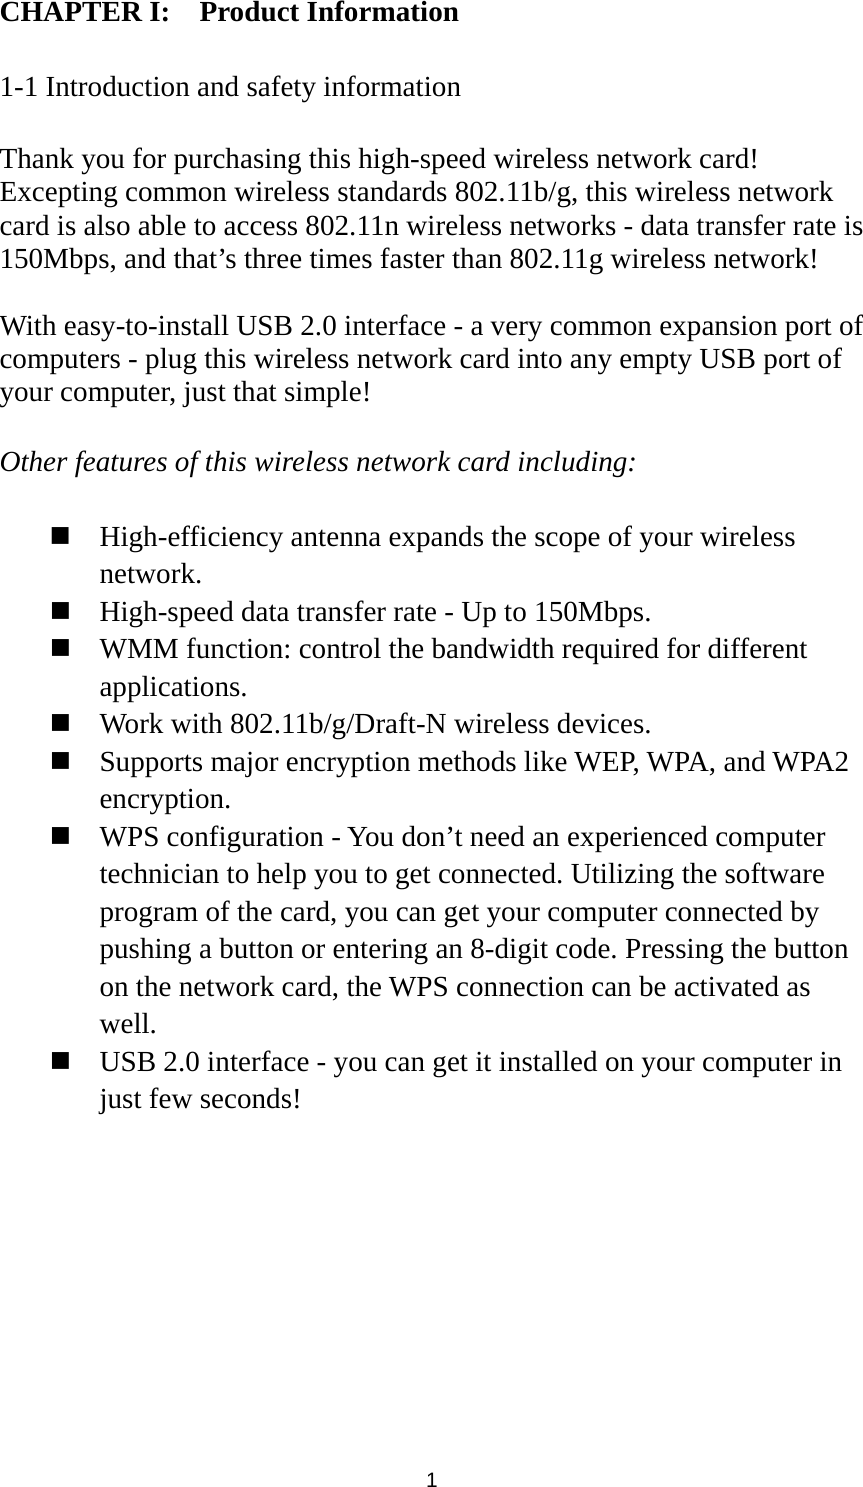  1 CHAPTER I:    Product Information  1-1 Introduction and safety information  Thank you for purchasing this high-speed wireless network card! Excepting common wireless standards 802.11b/g, this wireless network card is also able to access 802.11n wireless networks - data transfer rate is 150Mbps, and that’s three times faster than 802.11g wireless network!    With easy-to-install USB 2.0 interface - a very common expansion port of computers - plug this wireless network card into any empty USB port of your computer, just that simple!  Other features of this wireless network card including:   High-efficiency antenna expands the scope of your wireless network.  High-speed data transfer rate - Up to 150Mbps.  WMM function: control the bandwidth required for different applications.  Work with 802.11b/g/Draft-N wireless devices.  Supports major encryption methods like WEP, WPA, and WPA2 encryption.  WPS configuration - You don’t need an experienced computer technician to help you to get connected. Utilizing the software program of the card, you can get your computer connected by pushing a button or entering an 8-digit code. Pressing the button on the network card, the WPS connection can be activated as well.  USB 2.0 interface - you can get it installed on your computer in just few seconds! 